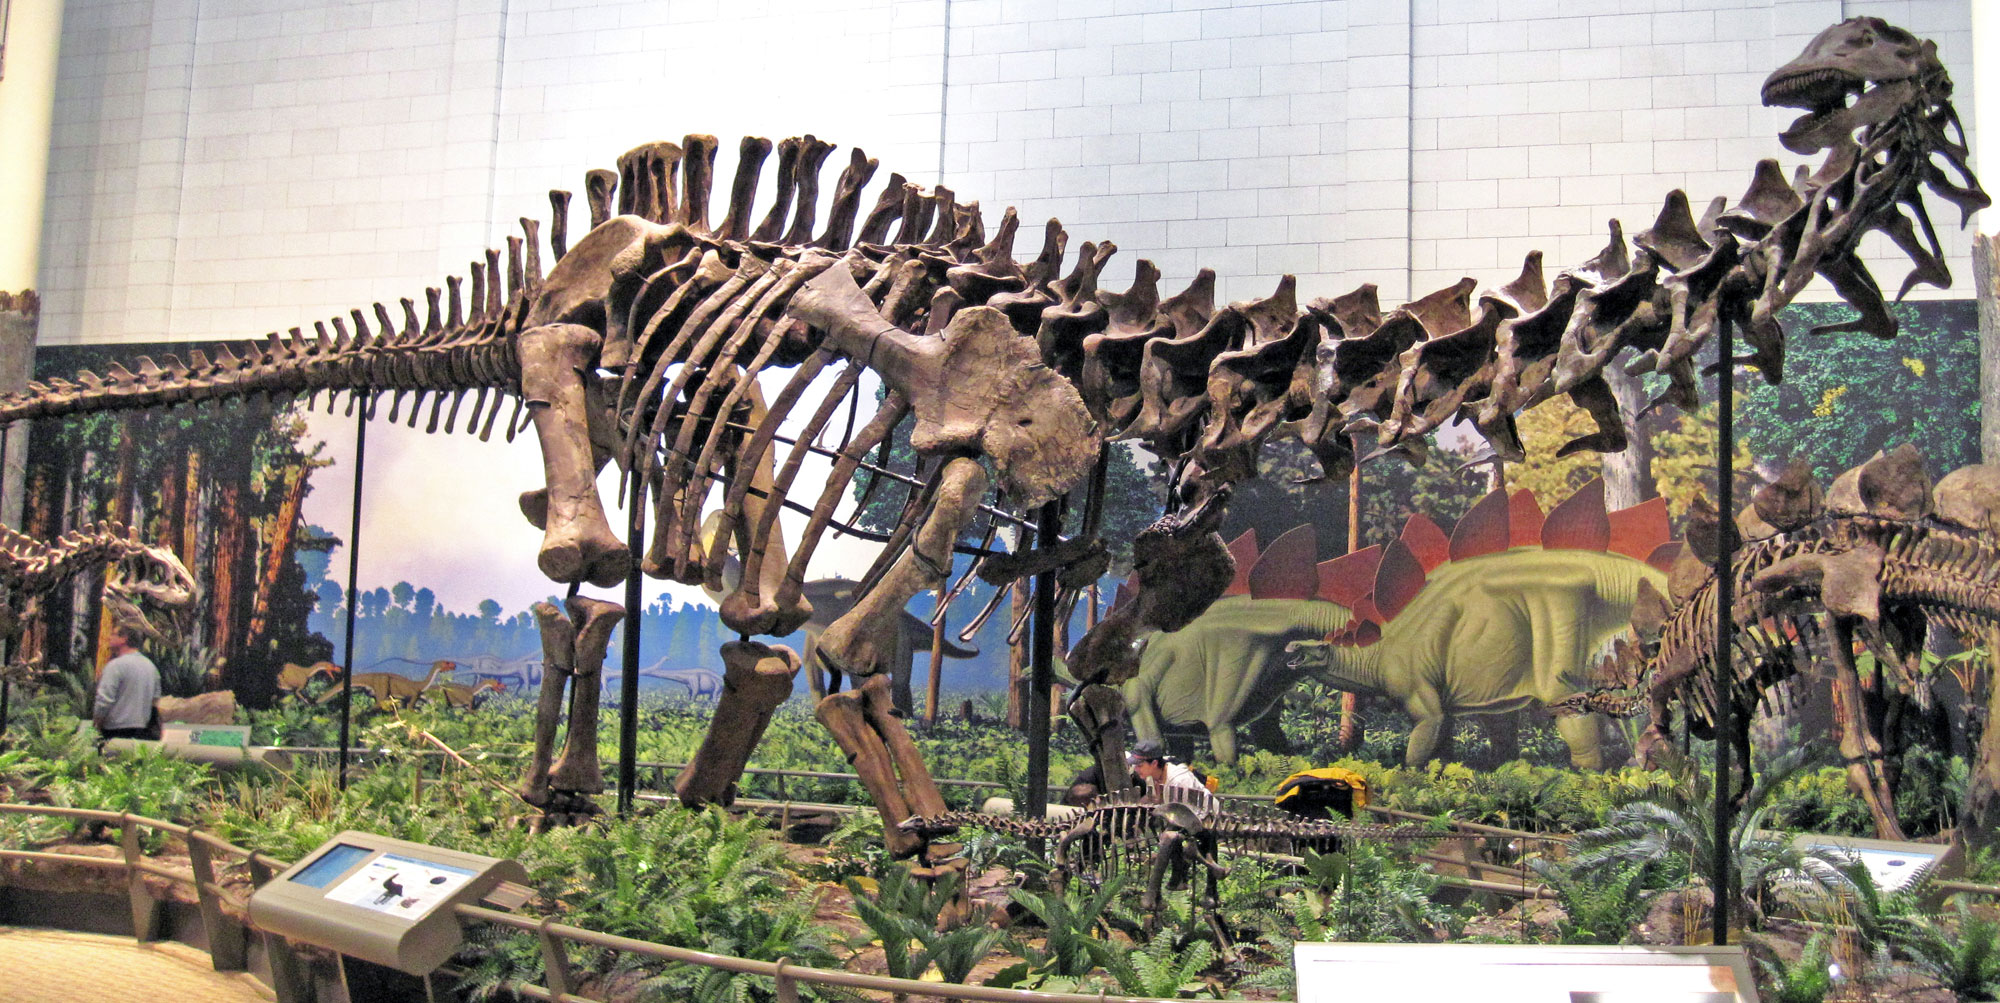 Photograph of a skeleton of Apatosaurus on display at the Carnegie Museum. Apatosaurus is a sauropod, a long-necked, herbivorous dinosaur that walks on all fours.